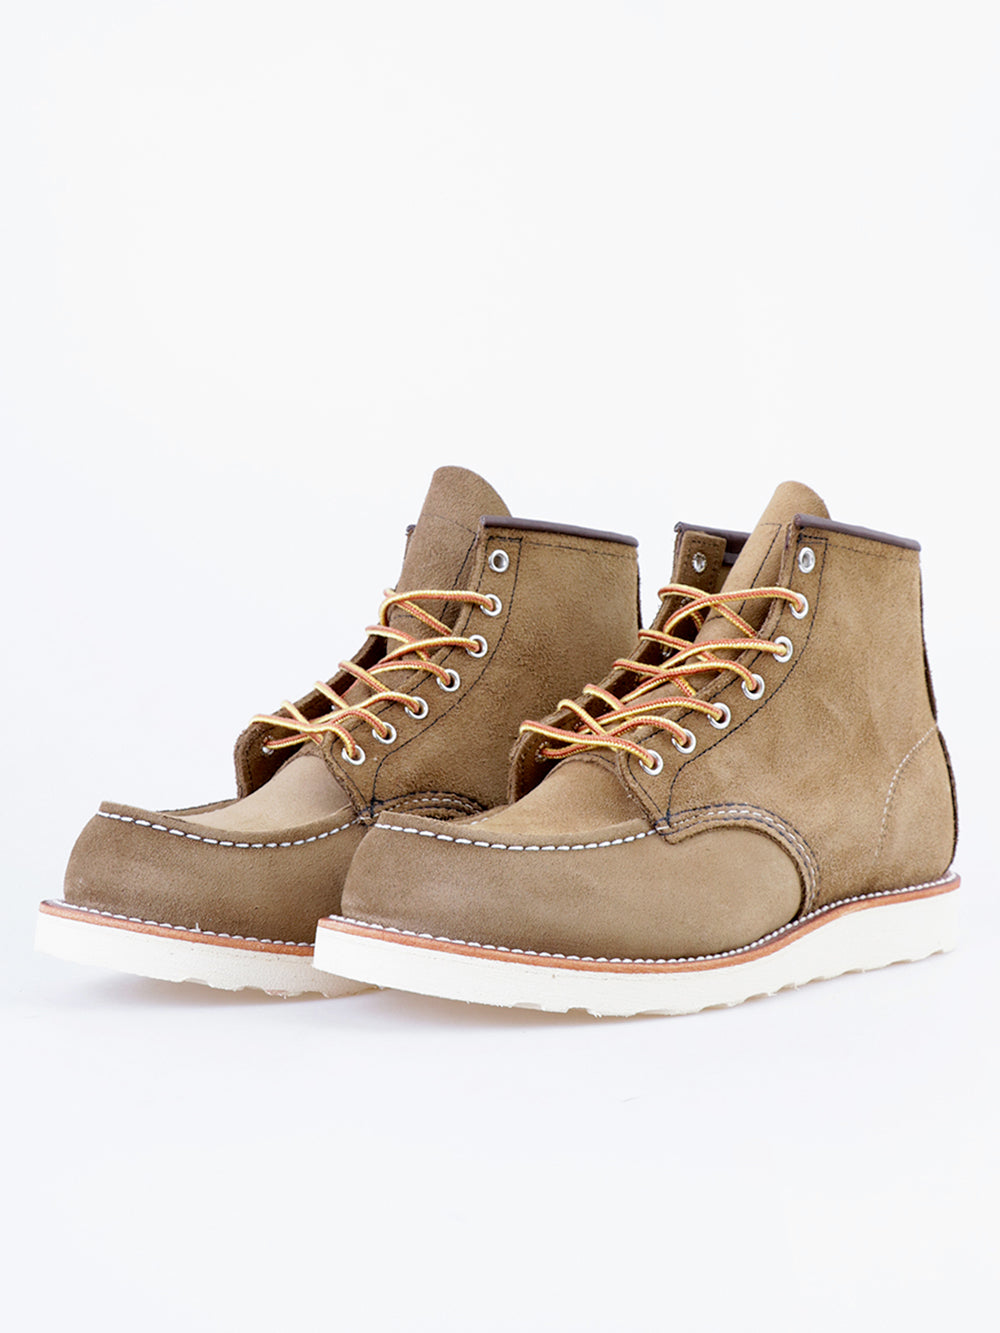 RED WING SHOES 8881 6'' Classic Moc Toe Olive Mohave Marrone Urbanstaroma